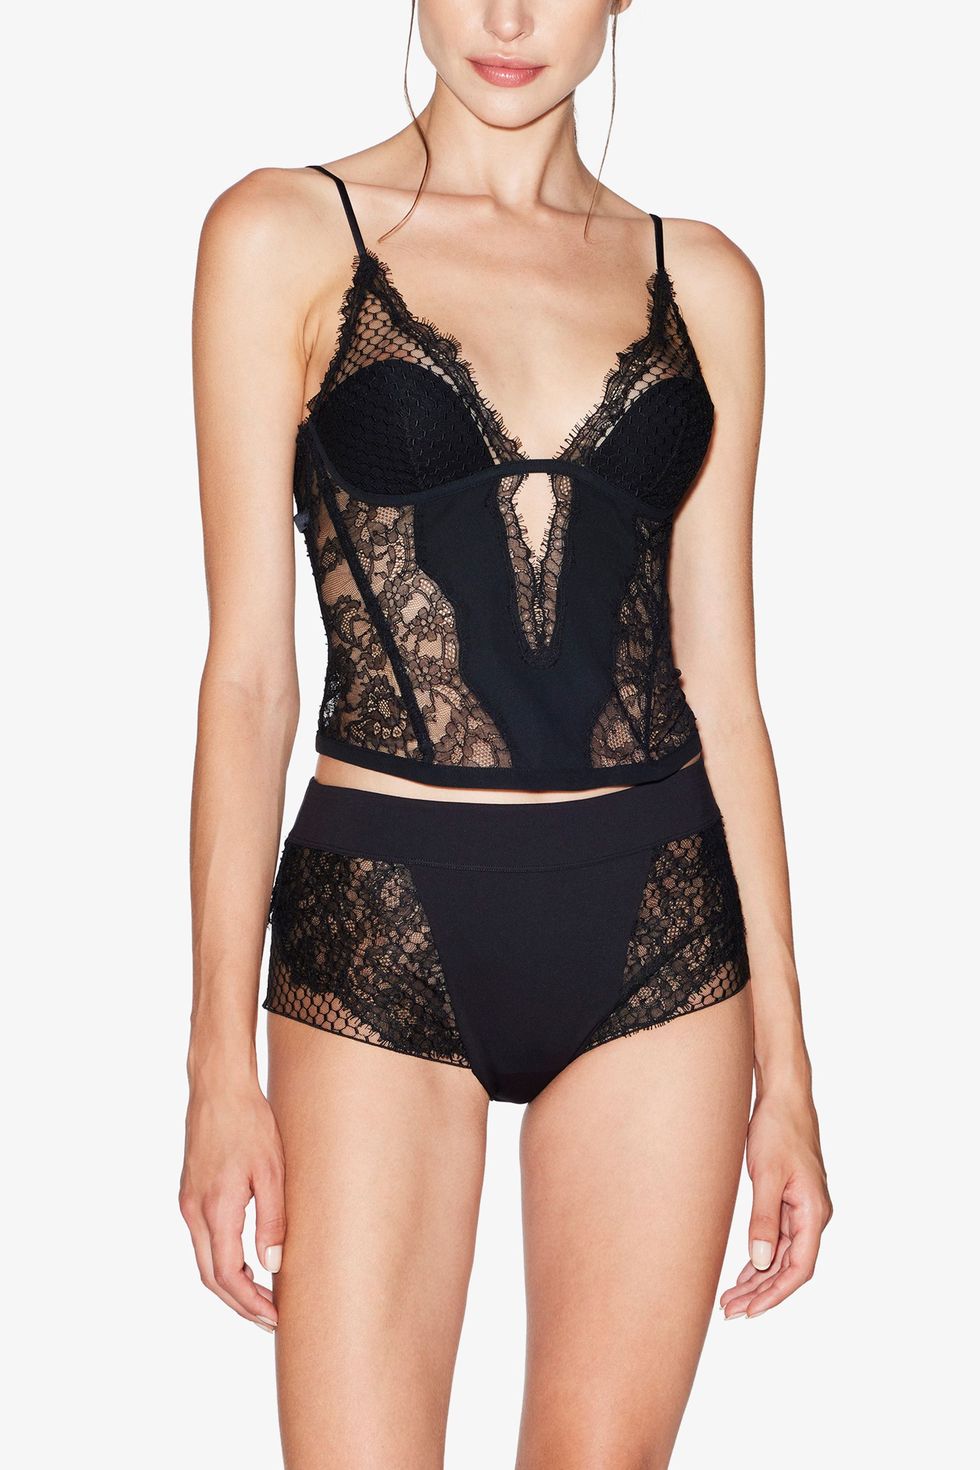 La Perla - Leavers lace gets a bold update with oversized blossoms